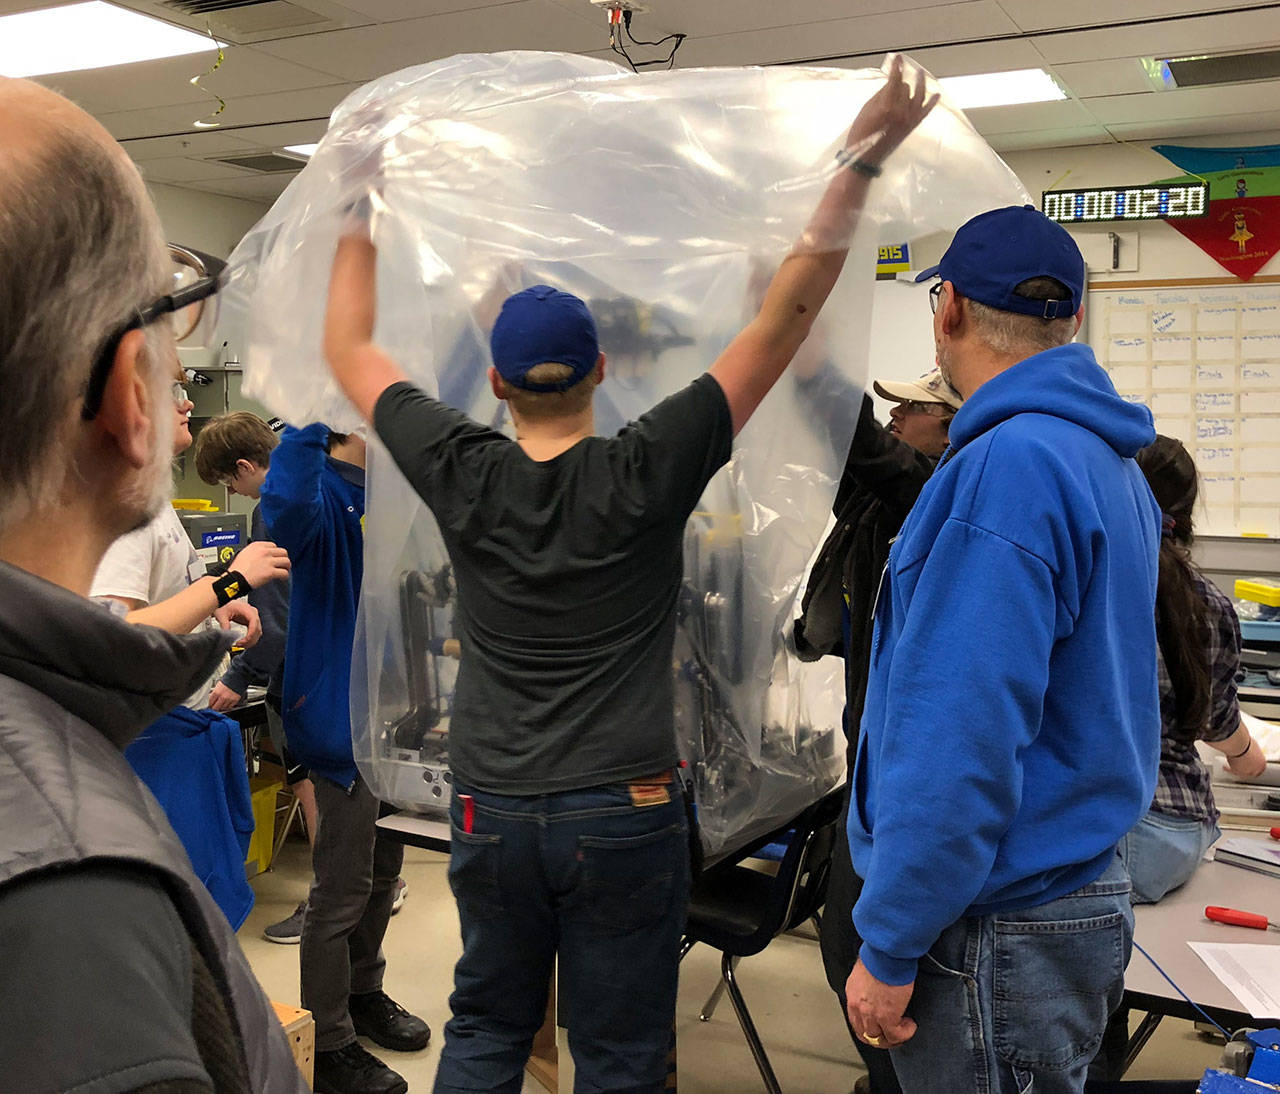 Bainbridge High students put their new robot, CHAOS, under a protective bag. CHAOS will meet the island community at an open house Wednesday, March 13 at BHS, where members of the 4915 Spartronics, the school’s robotics team, will show off their latest creation. (Photo courtesy of 4915 Spartronics)